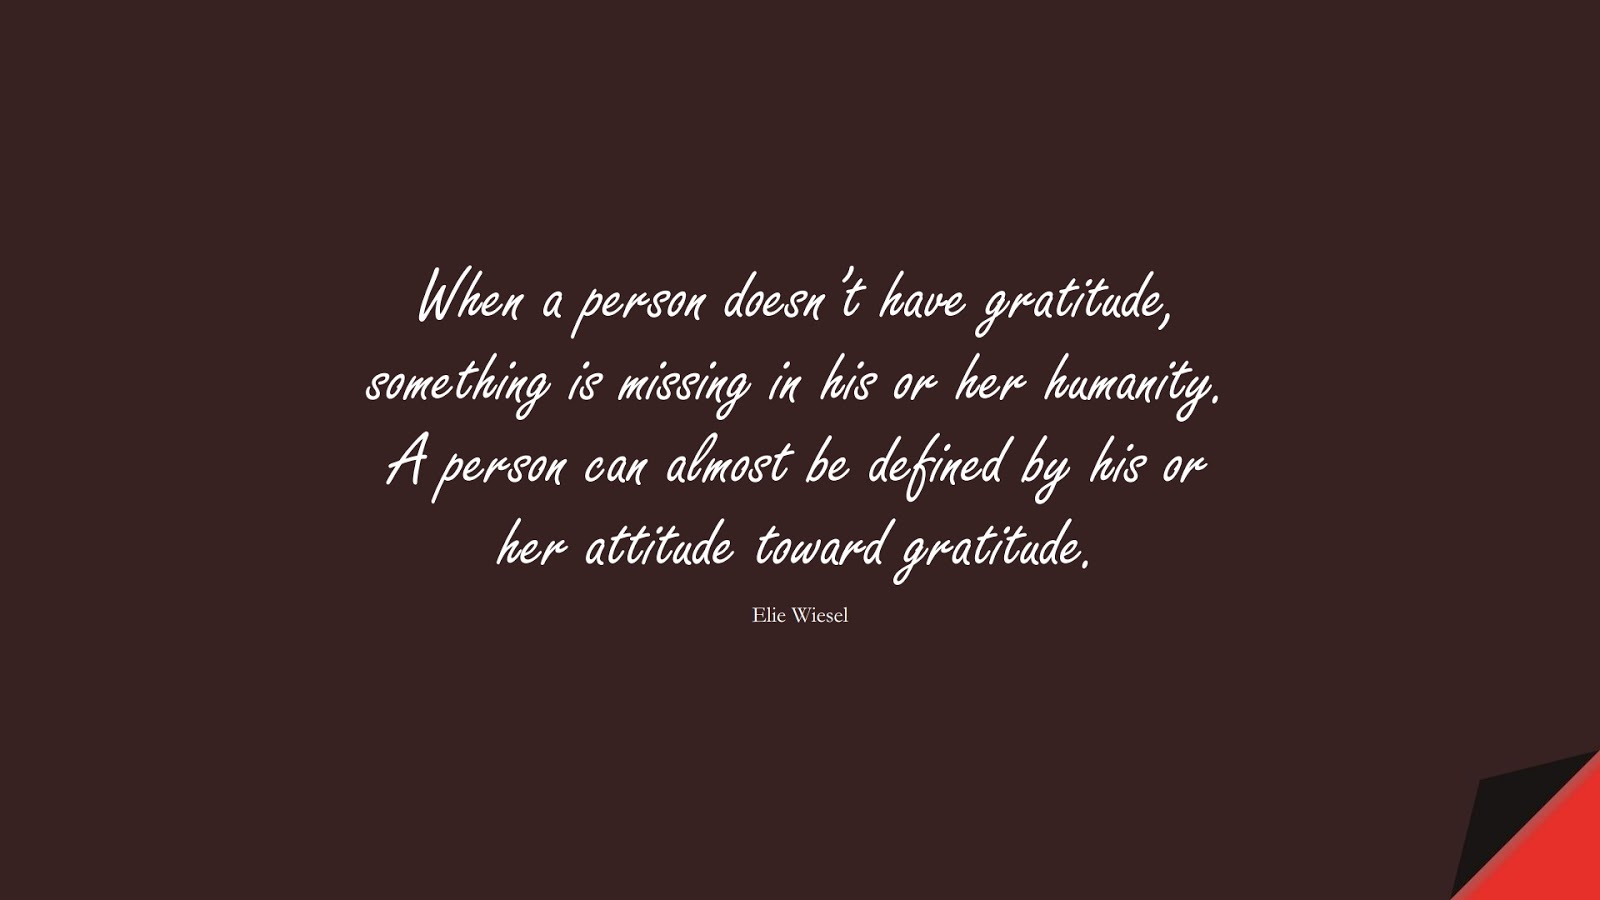 When a person doesn’t have gratitude, something is missing in his or her humanity. A person can almost be defined by his or her attitude toward gratitude. (Elie Wiesel);  #HumanityQuotes